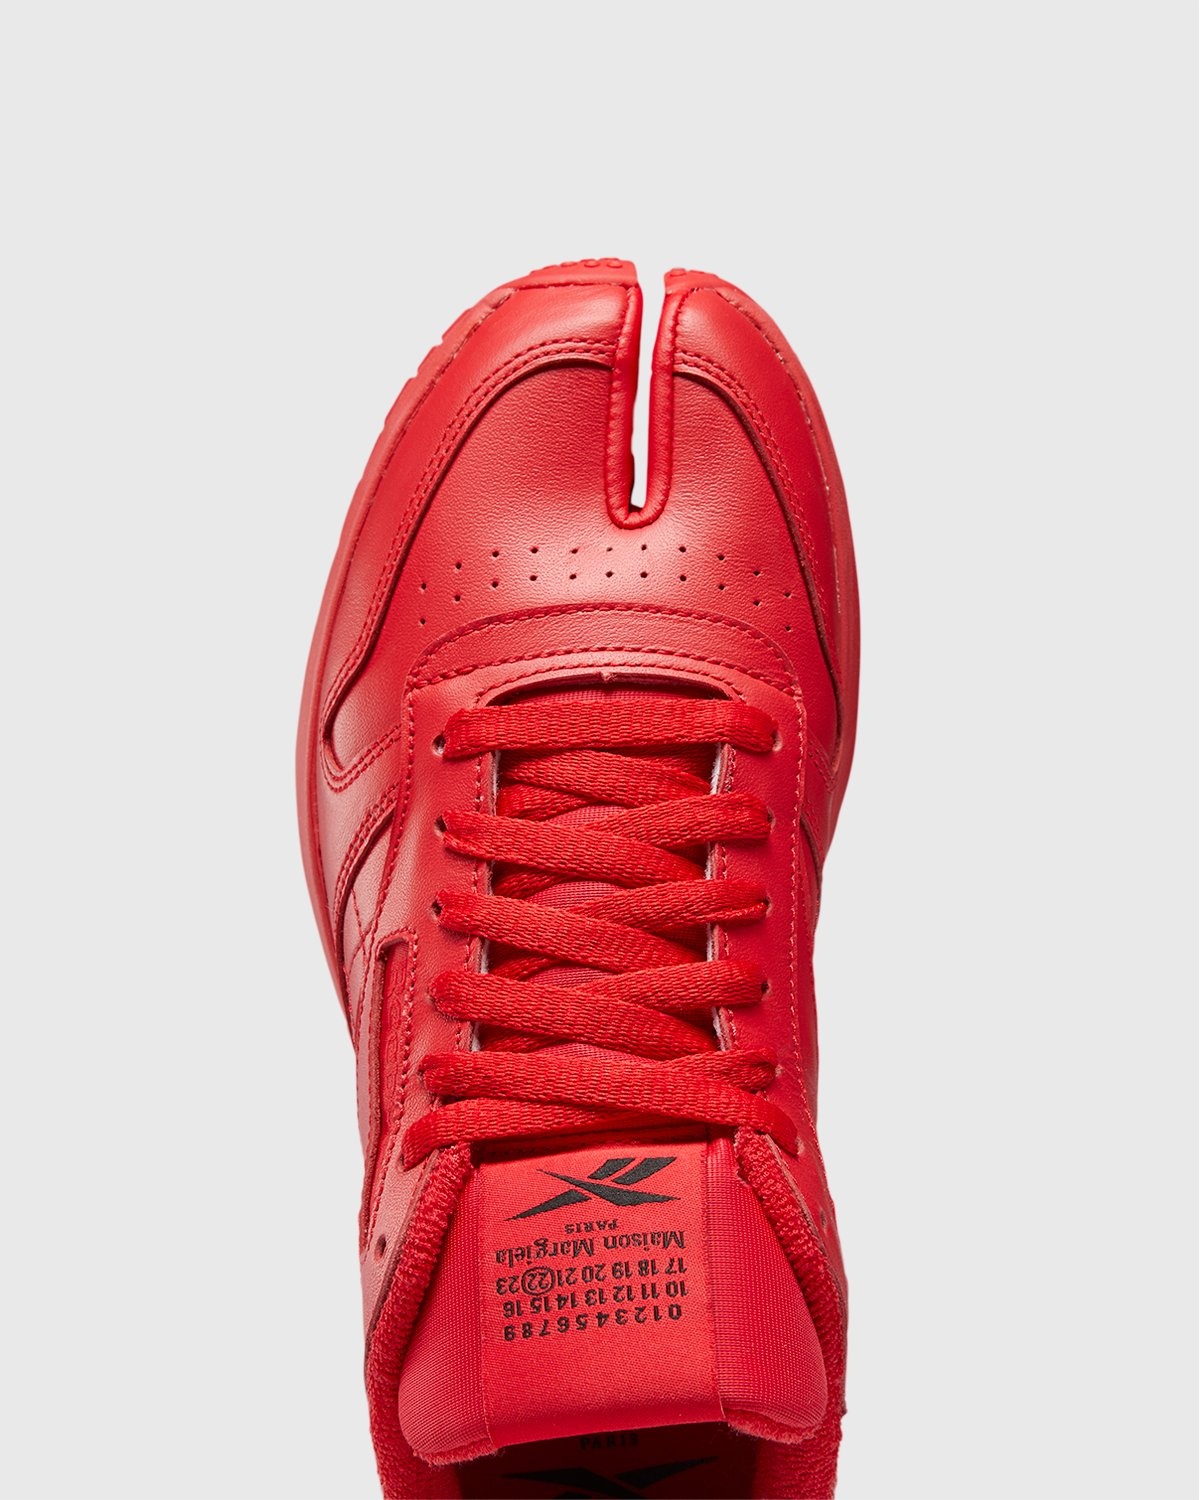 Maison Margiela x Reebok – Classic Leather Tabi Red - Low Top Sneakers - Red - Image 6